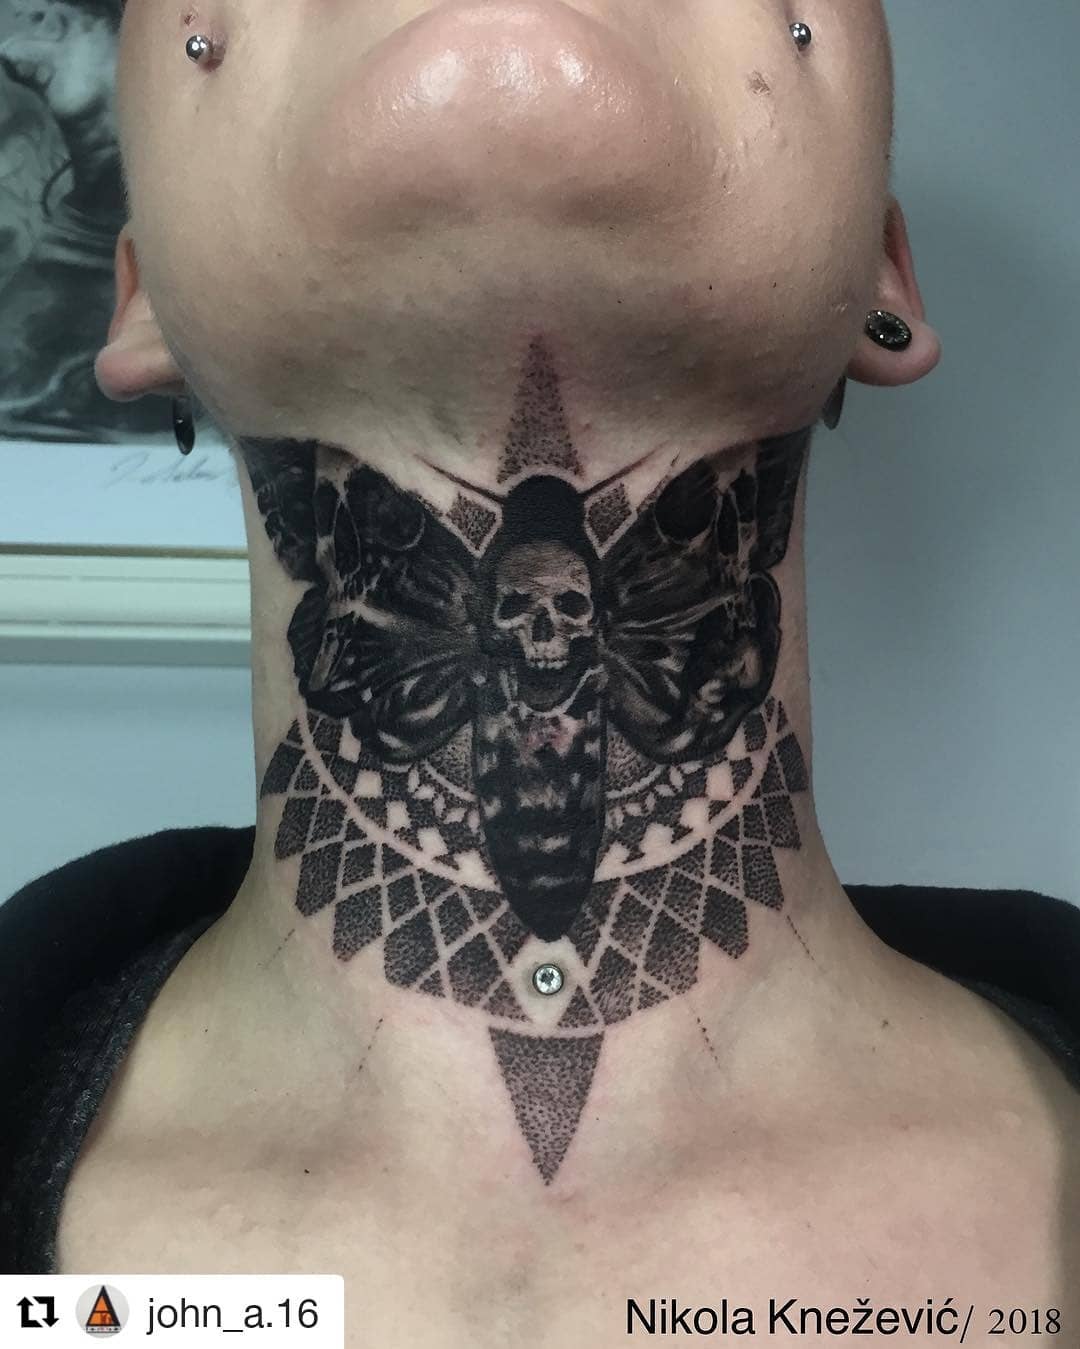 Show that you’re stronger than ever before with this giant neck tattoo. It is a fierce design that can be worn by those who fancy big and bold elements. If you’re someone who likes to look dominant and you’re always growing in any way, shape, or form, this will intrigue you.